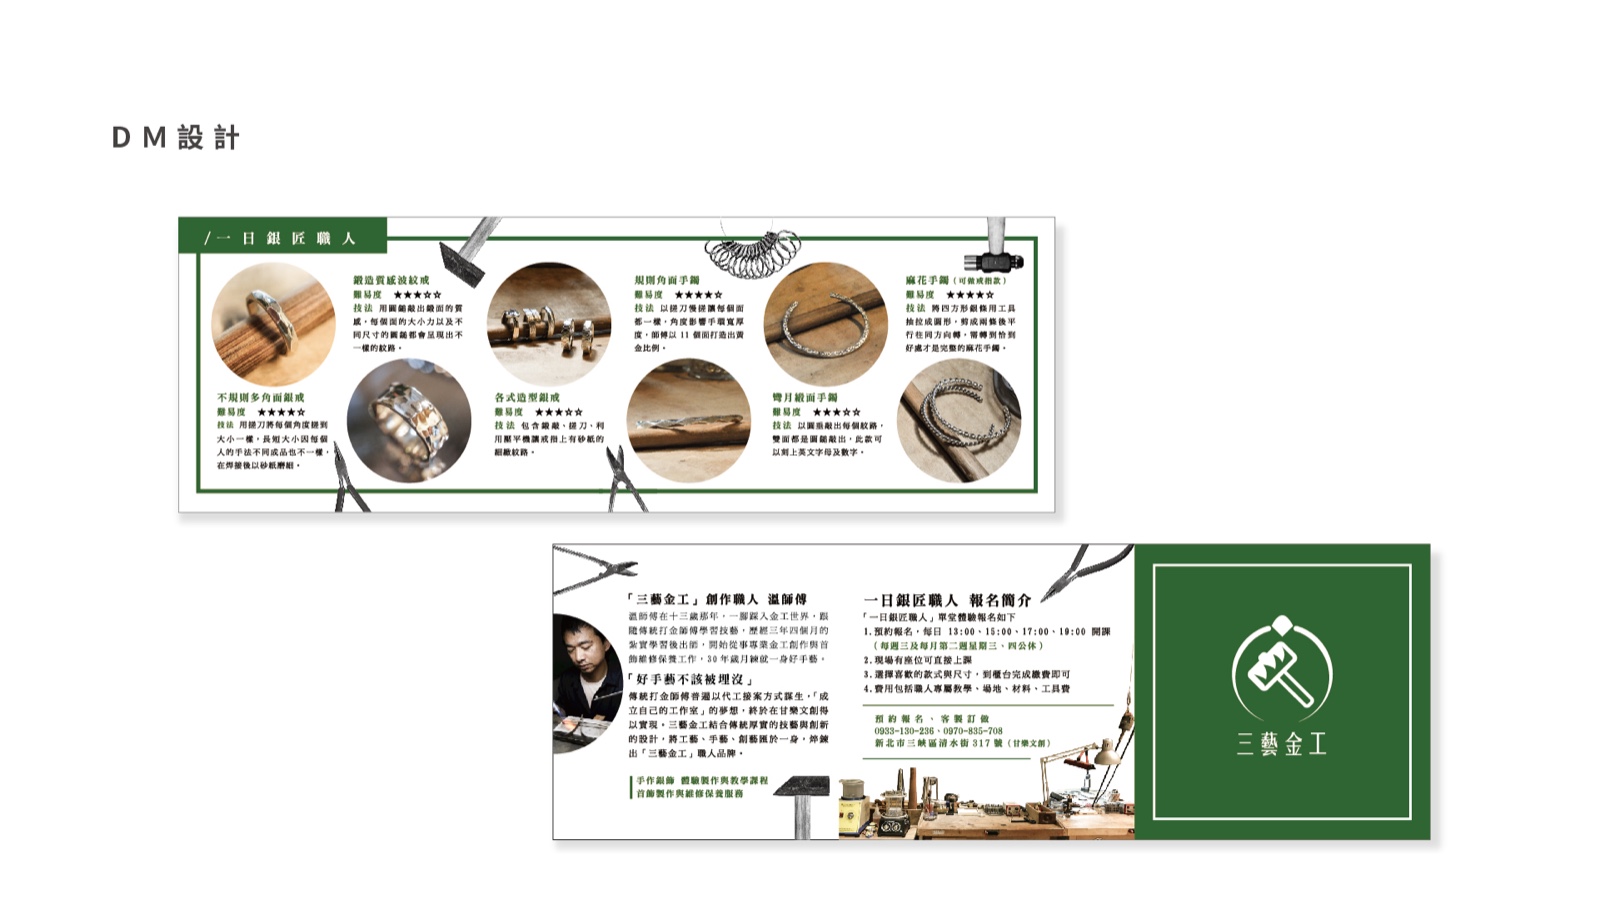 Fate has brought CAN Culture, Art & Nature and Master Wen together. Through space, product and experience design, Sanyi Metalworking combines traditional solid techniques and designs. It combines craft, handicraft and creativity to make the shokunin brand of “Sanyi Metalworking”.  | Taipei Cultural experience | CAN Culture